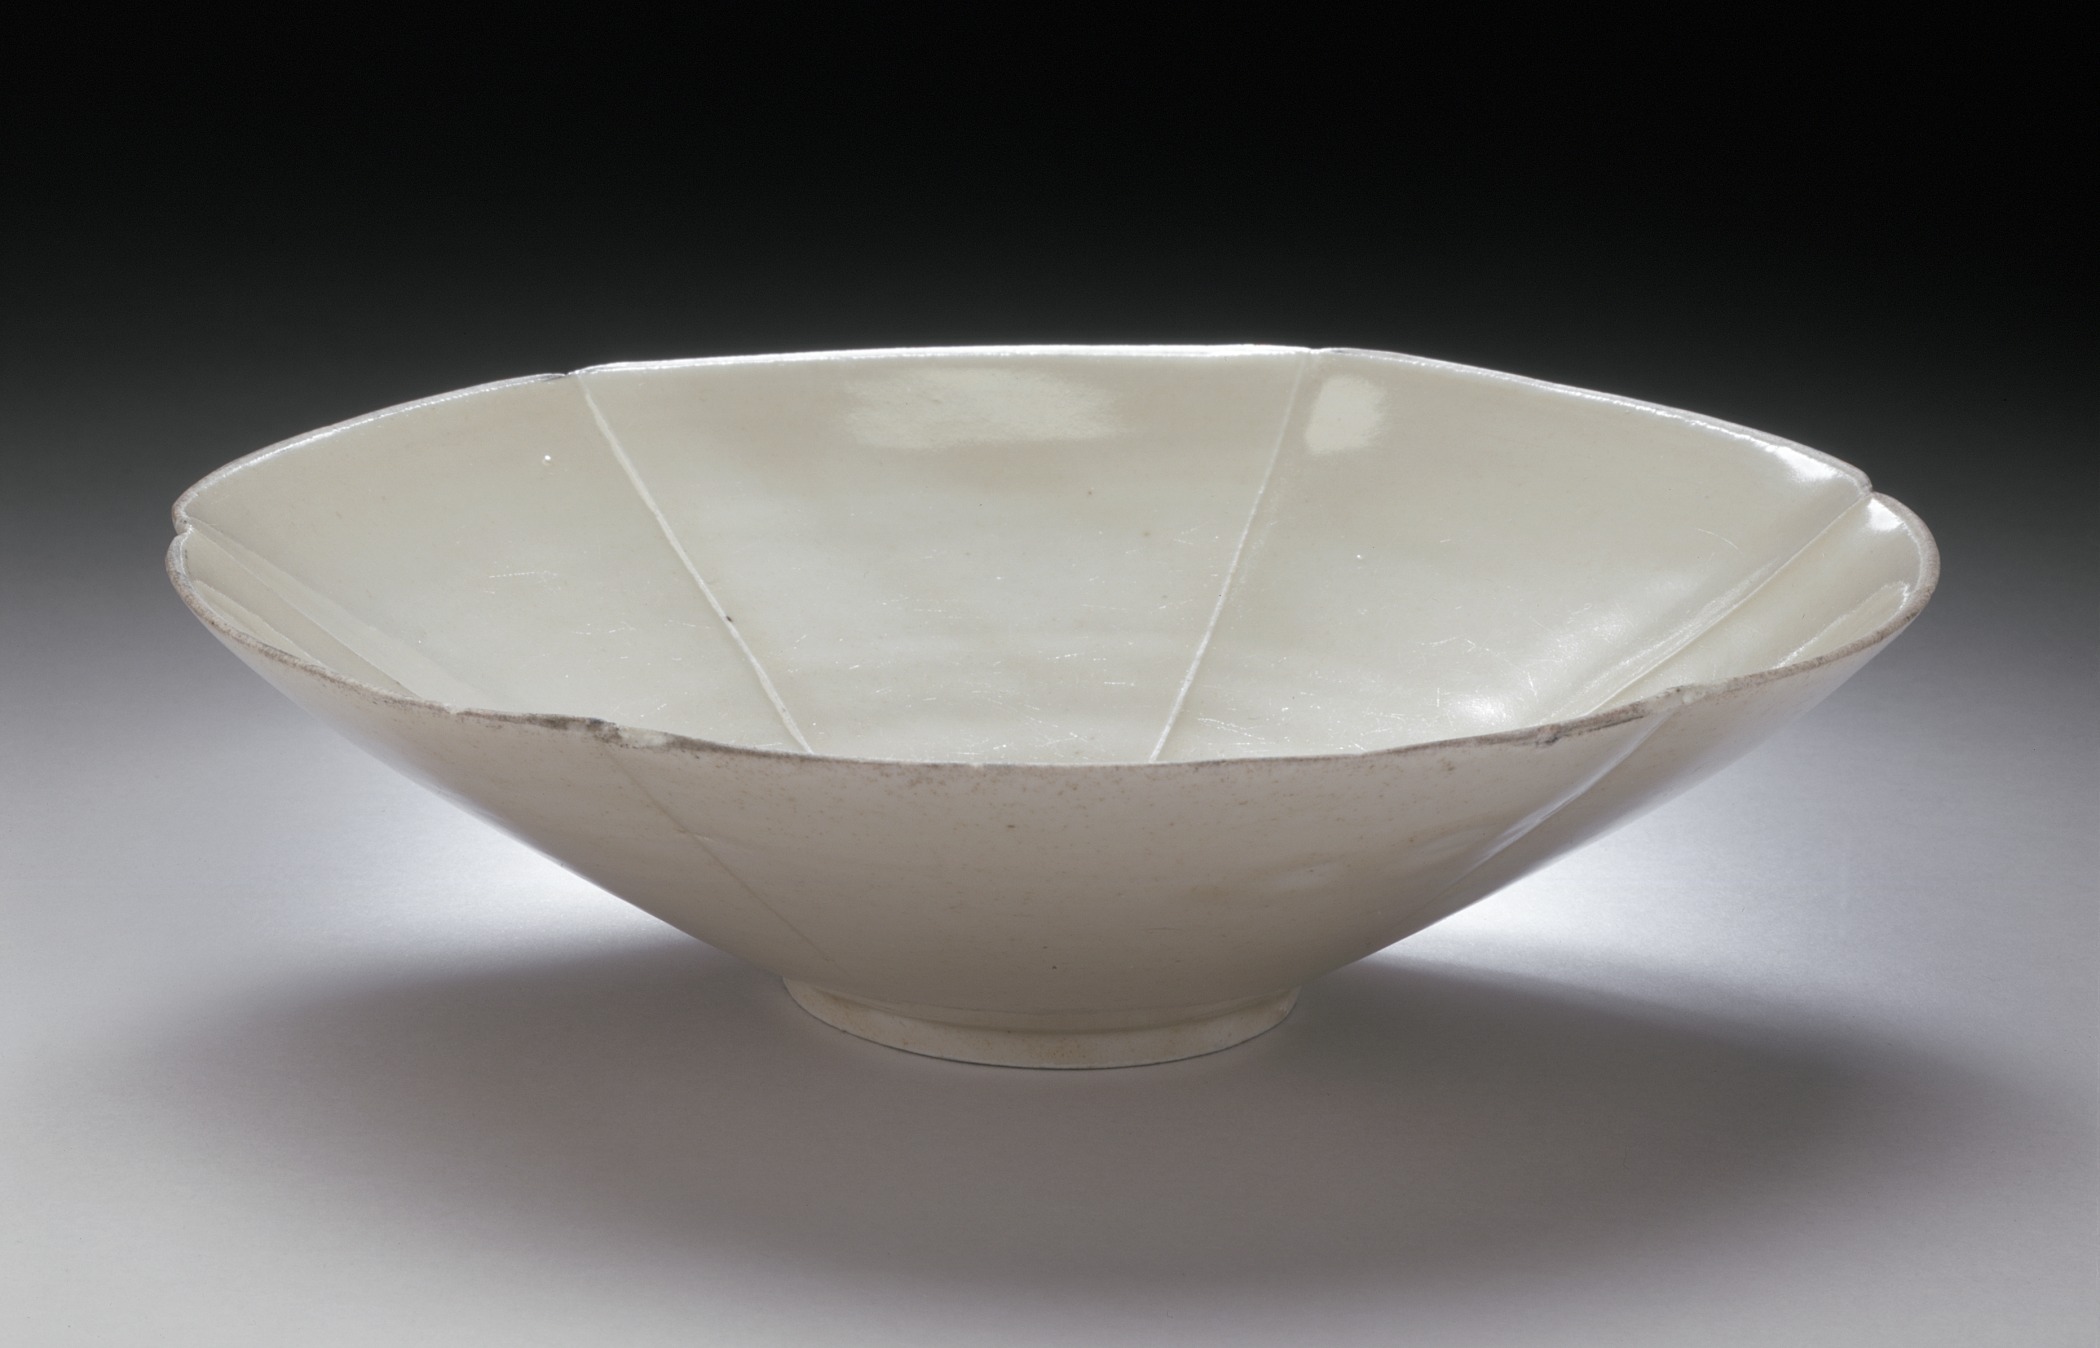 an empty white bowl on a white surface